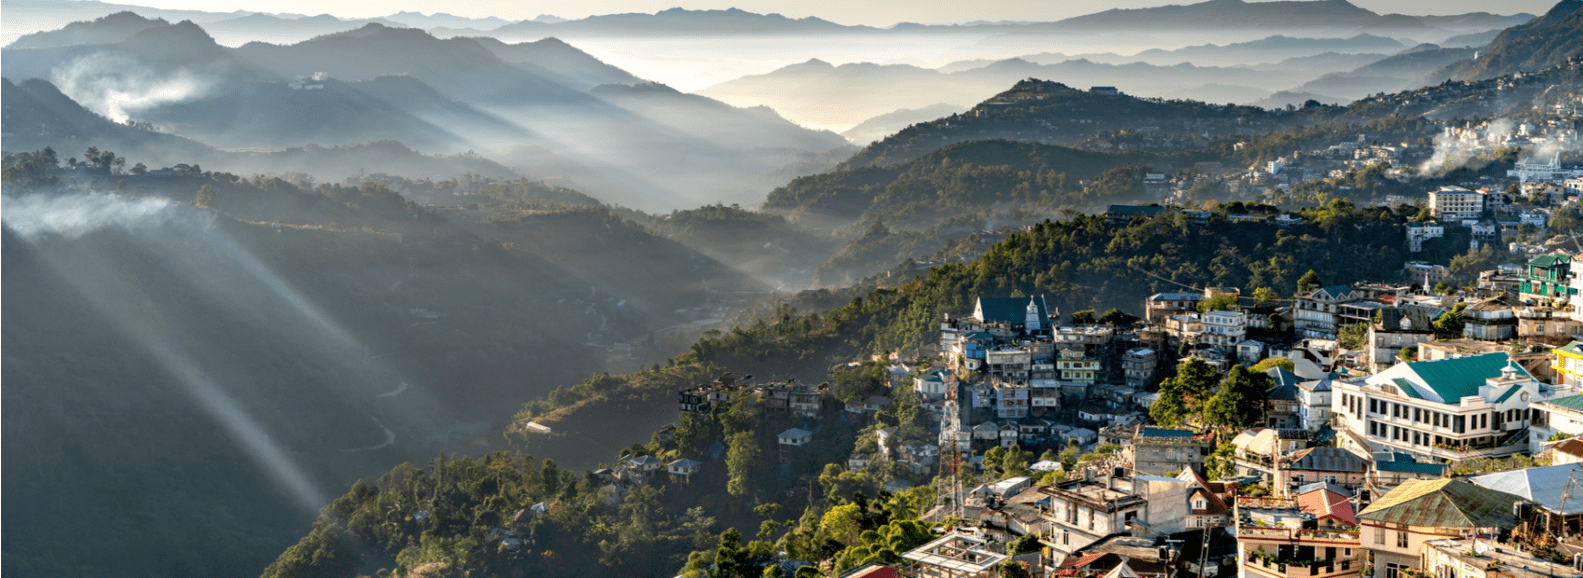 Amazing aerial view of Aizawl city with houses and mountains